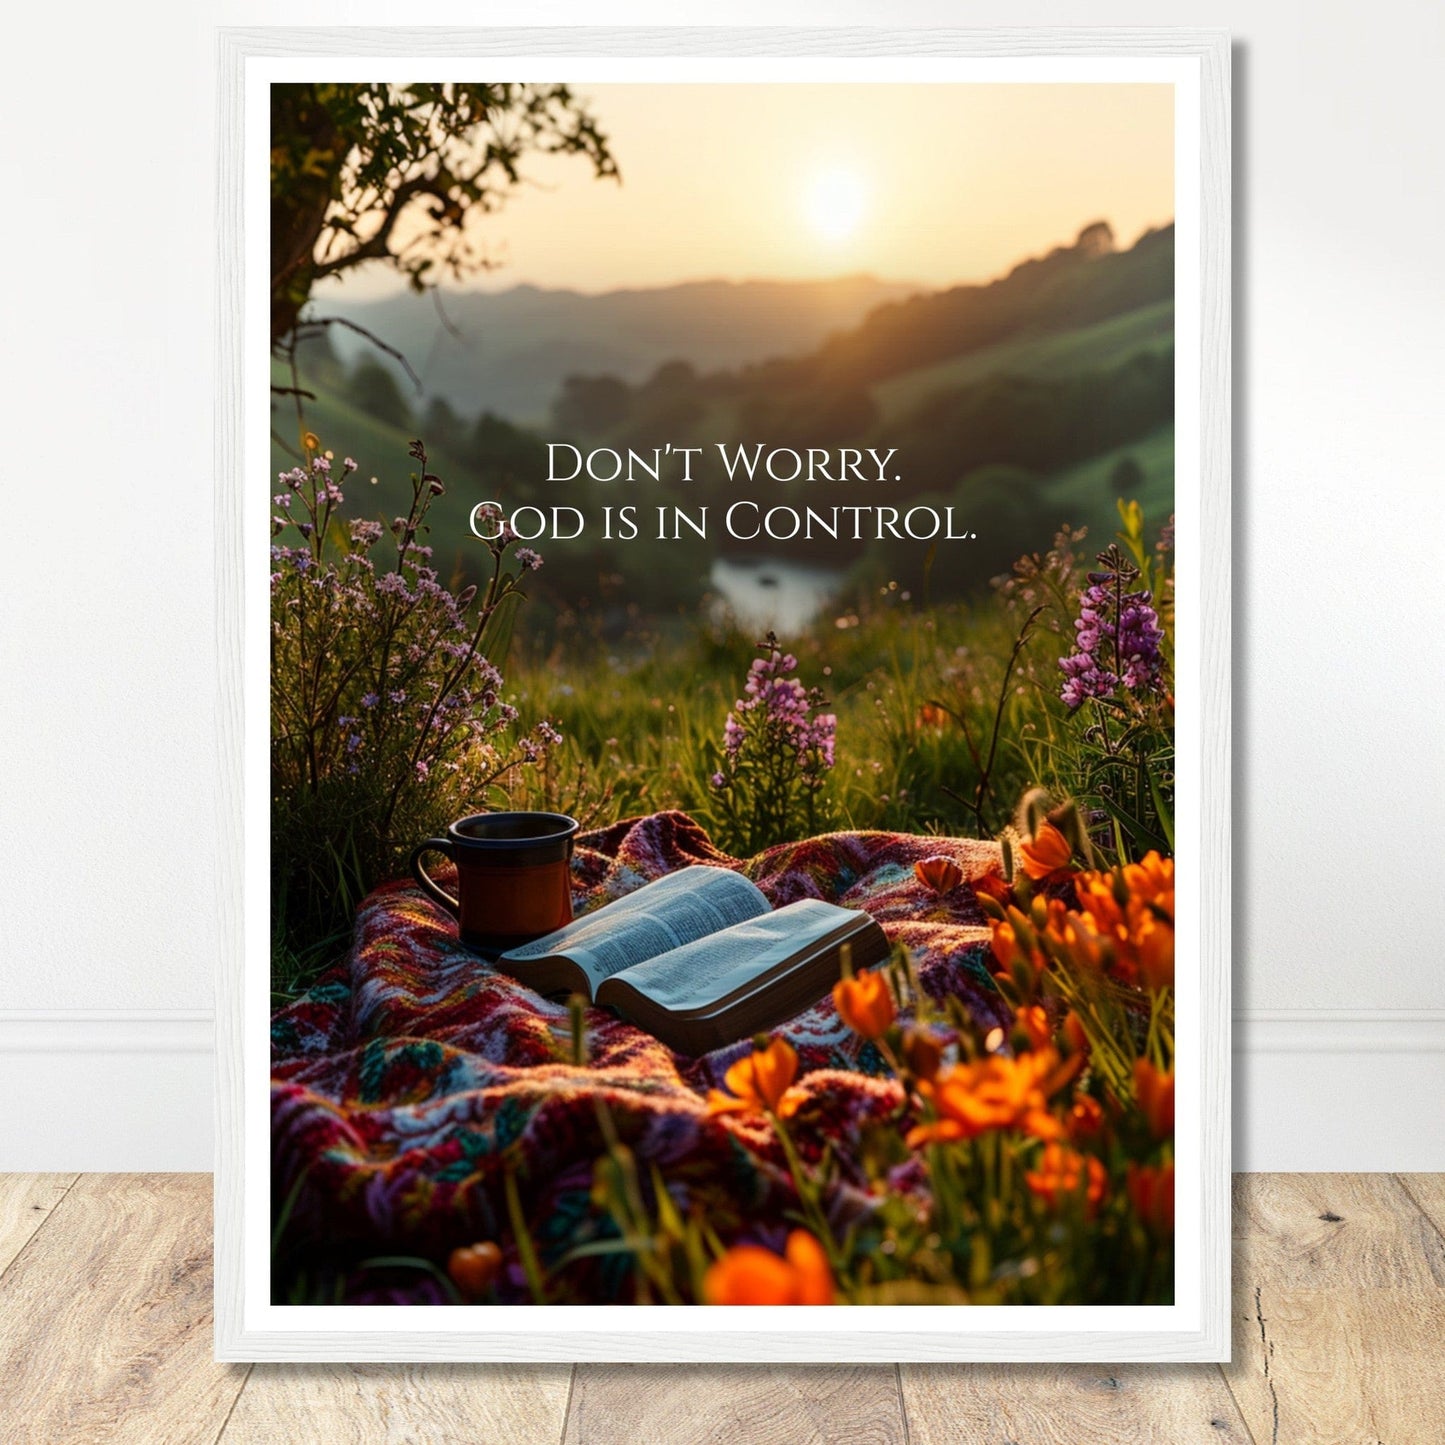 Coffee With My Father Print Material 45x60 cm / 18x24″ / White frame Premium Matte Paper Wooden Framed Poster